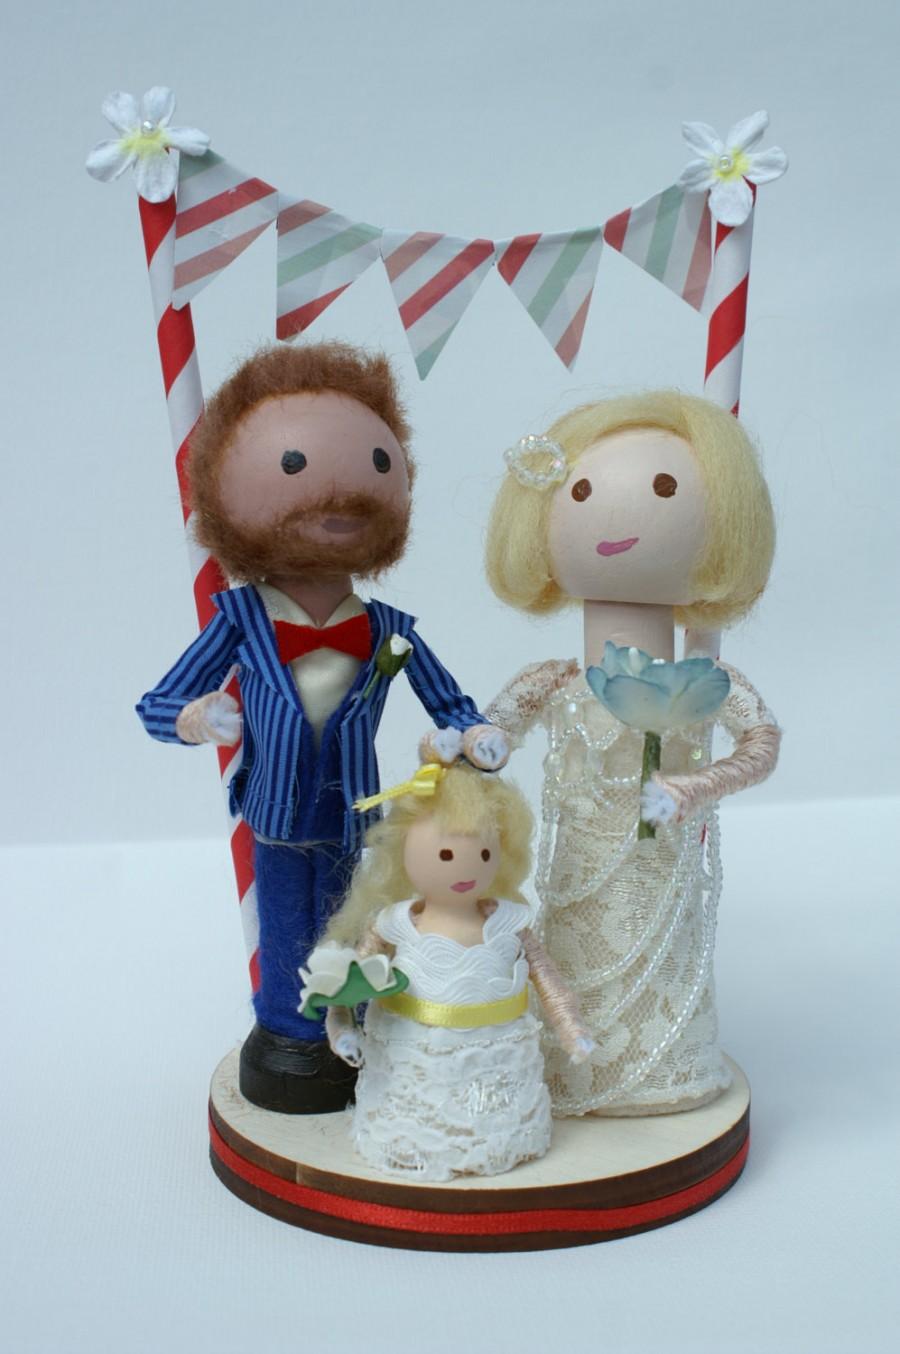 Mariage - Handmade, Customized, Bride and Groom, Wooden Peg Doll, Wedding Cake Topper